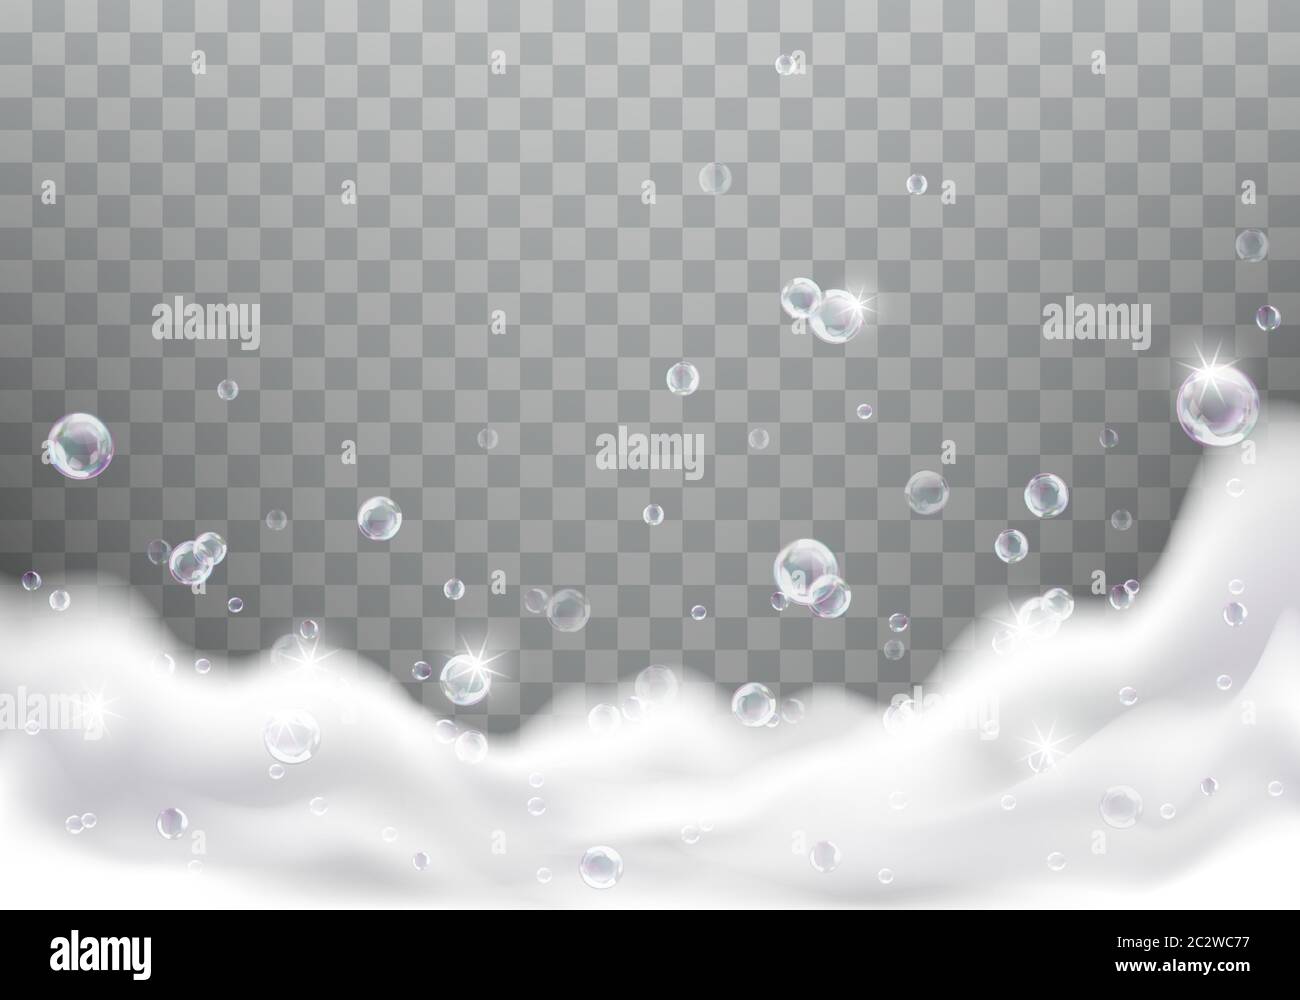 Bath foam realistic vector illustration on transparent background. White soap suds with rainbow air bubbles, shampoo bubbles or foaming detergent text Stock Vector